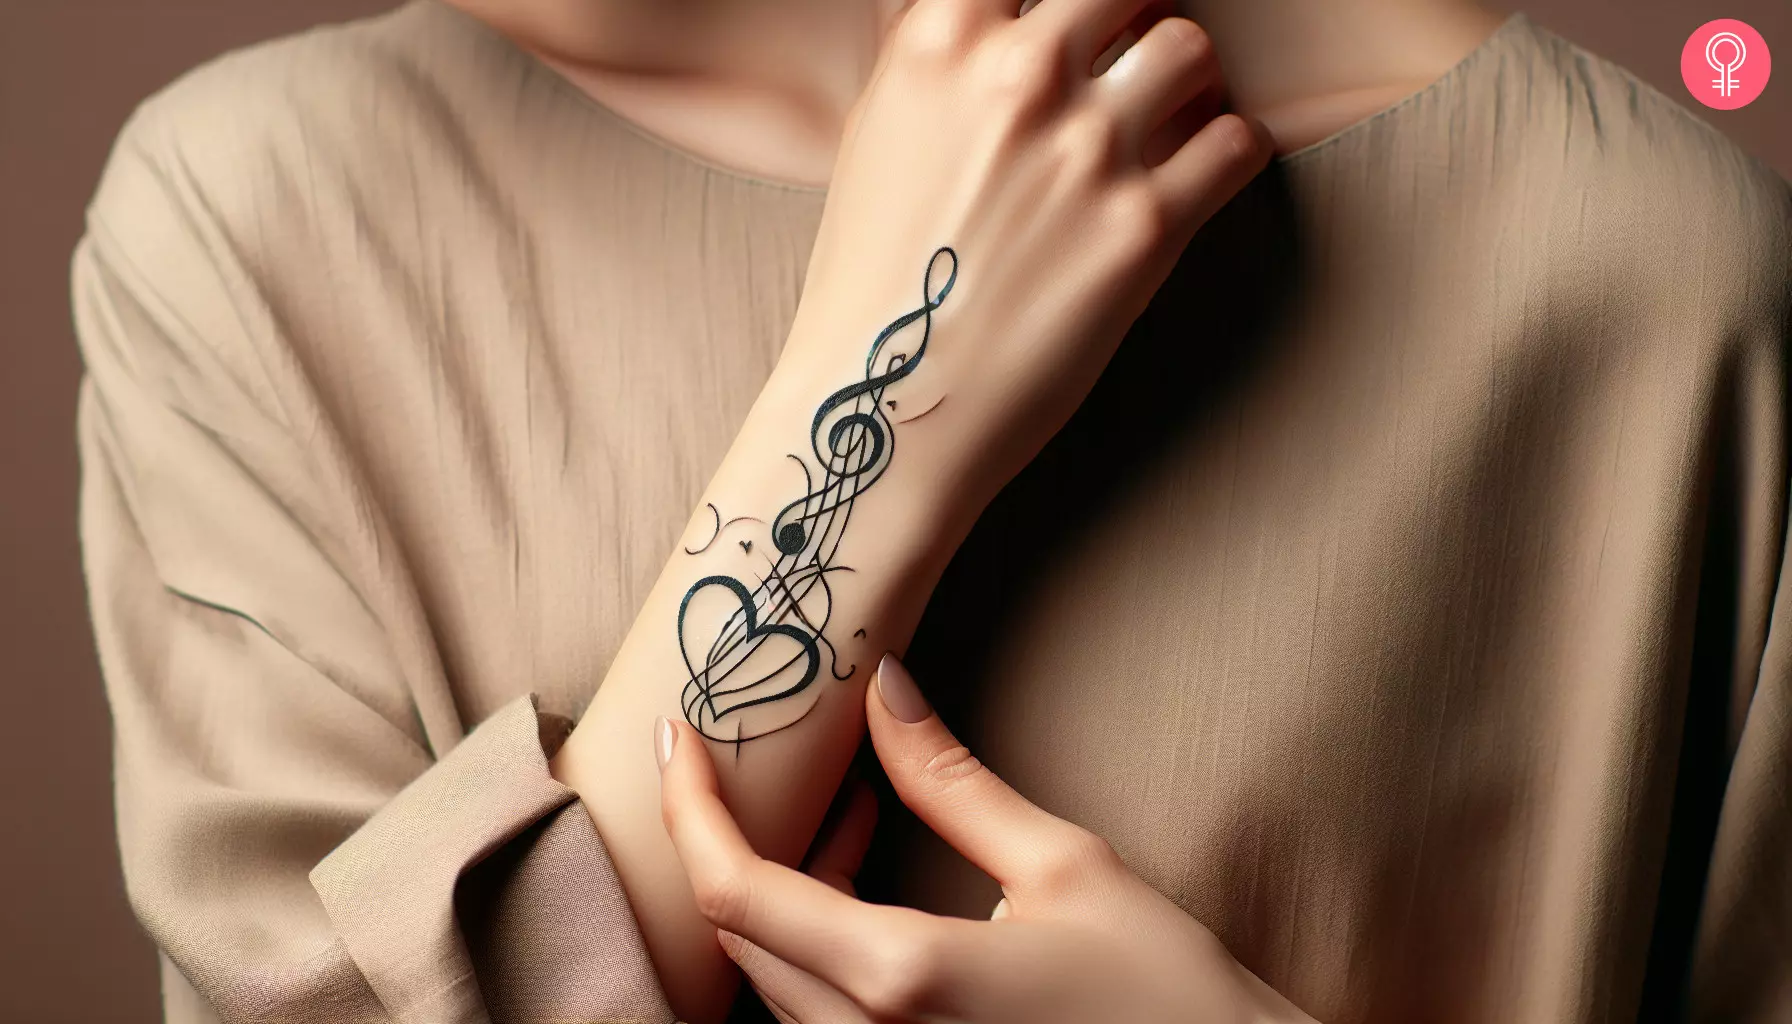 A music note with a heart inked on the forearm